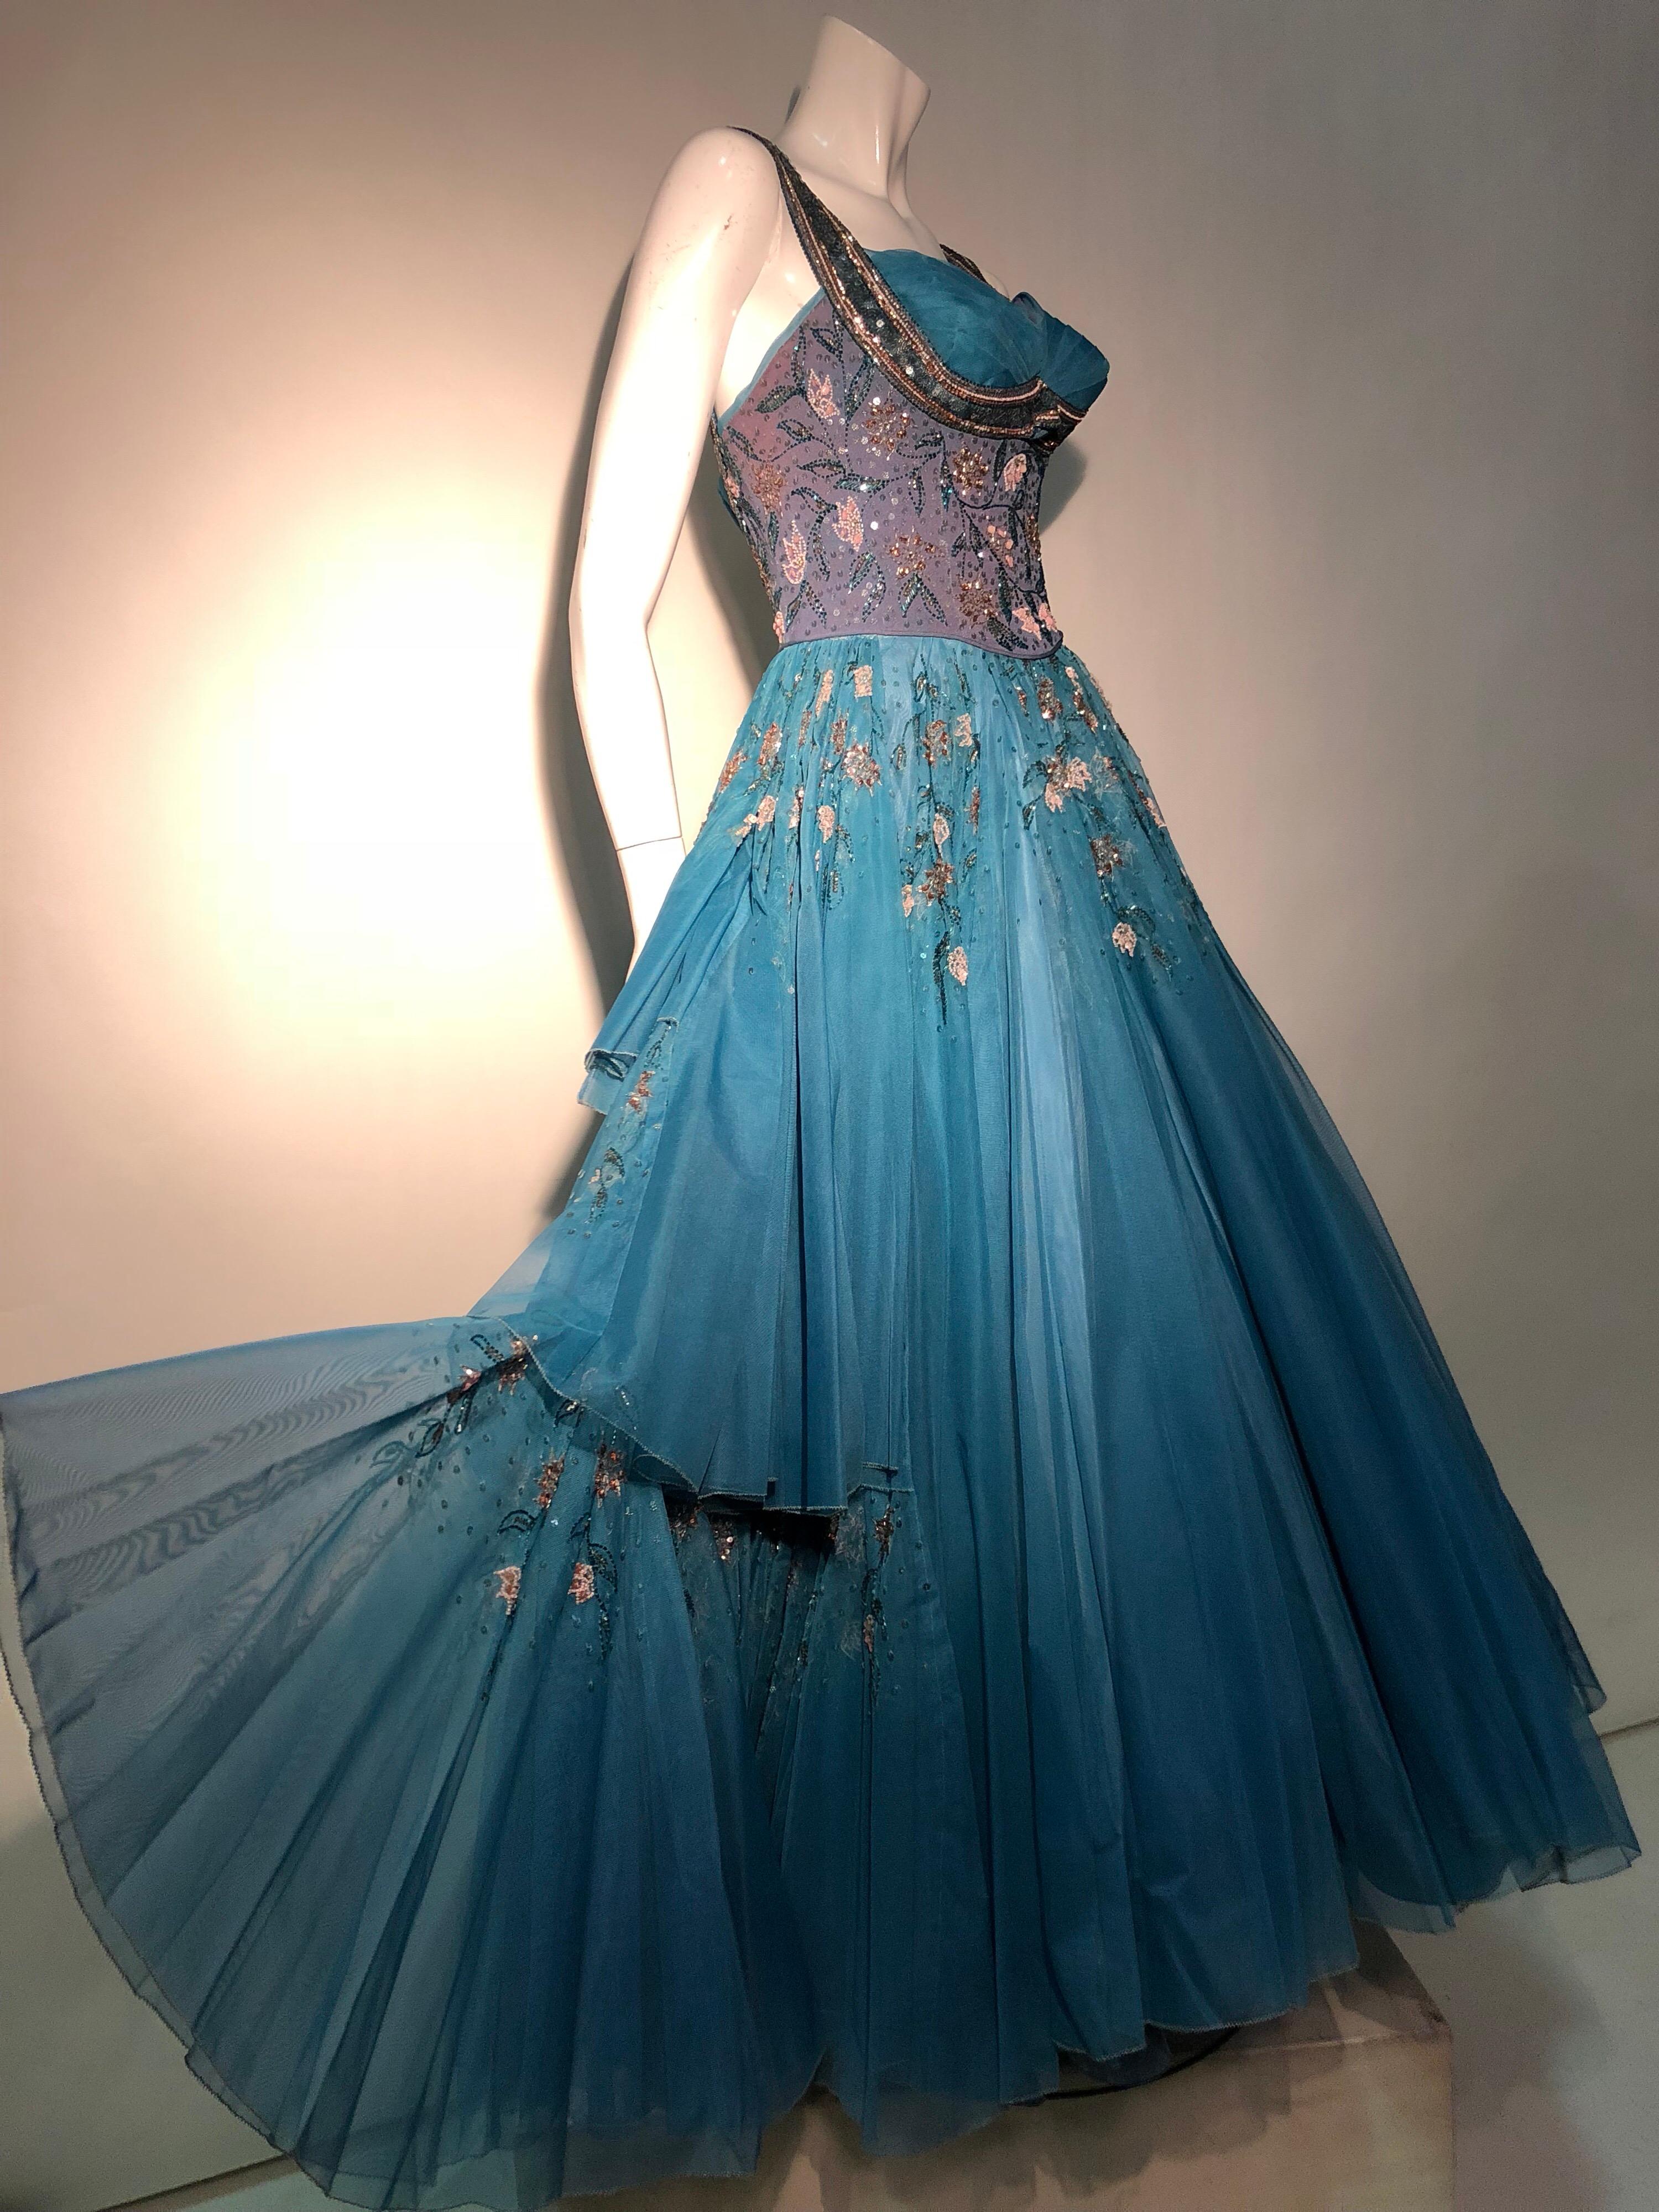 Women's 1950s MGM Mme. Etoile by Irene Sharaff Couture Ball Gown in Deep Teal Silk For Sale